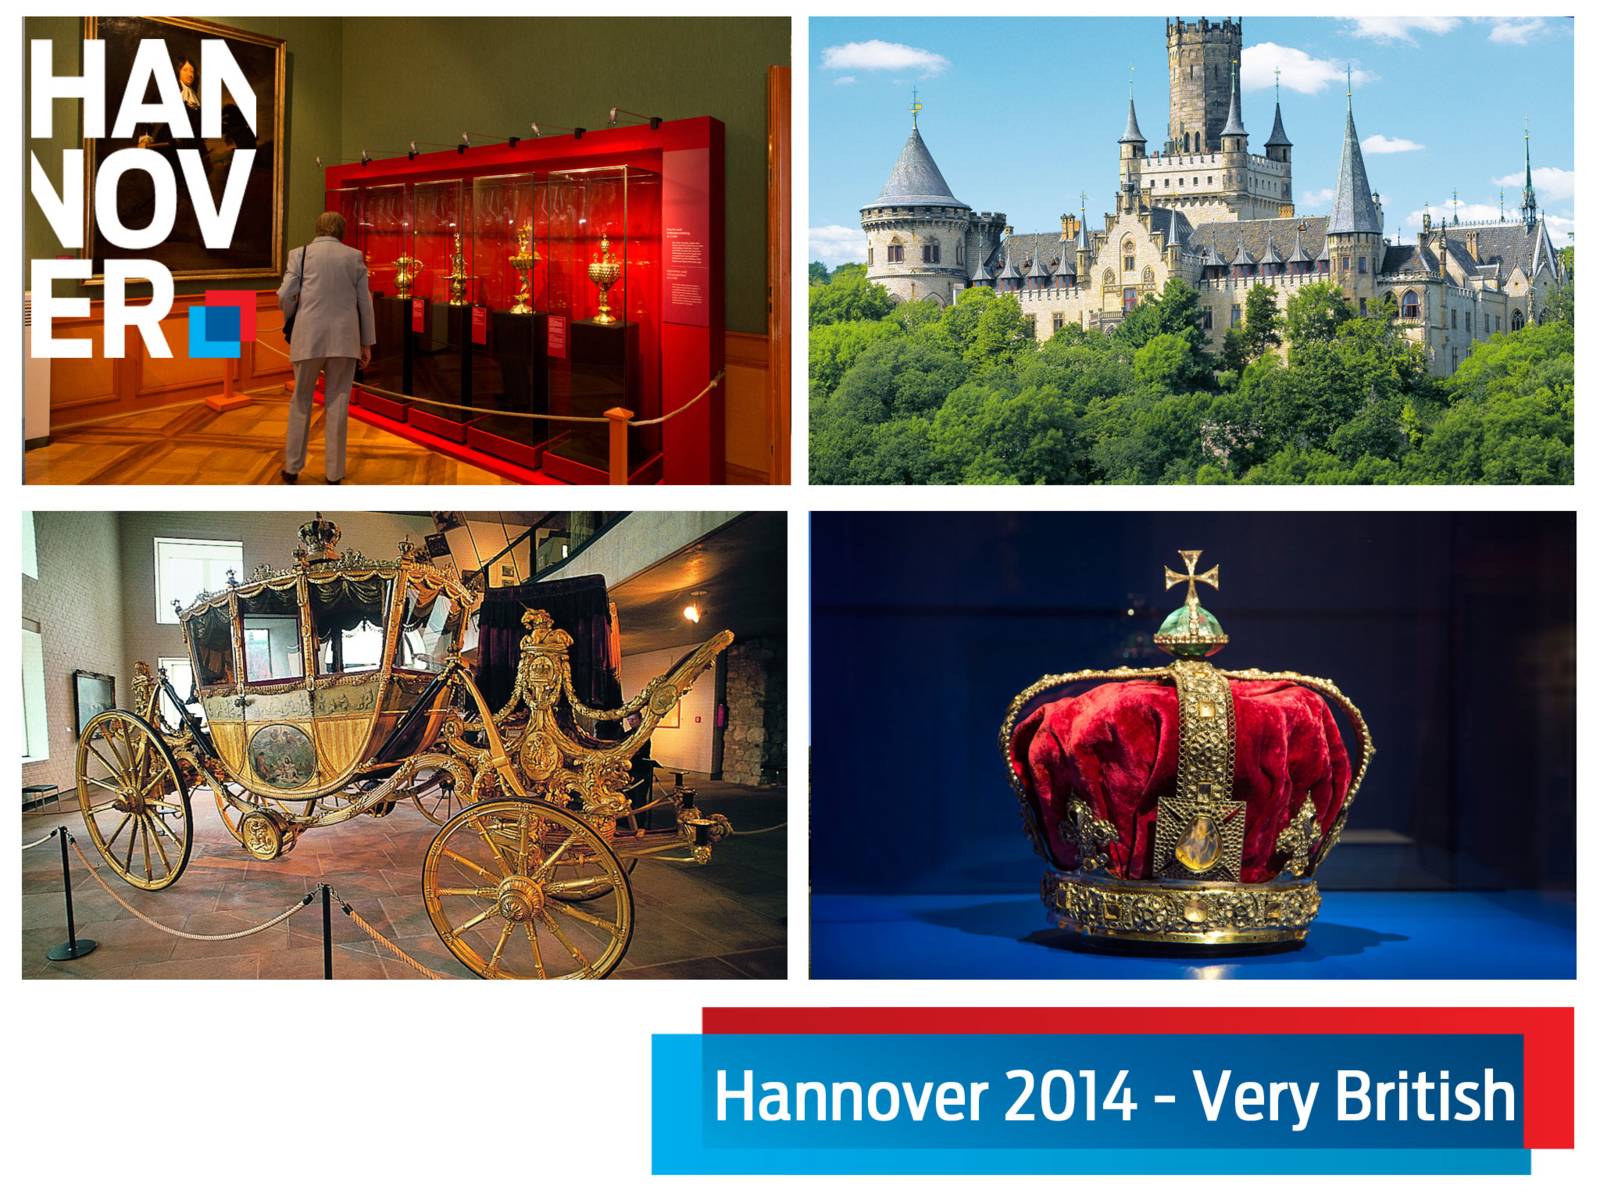 Hannover 2014 - Very British